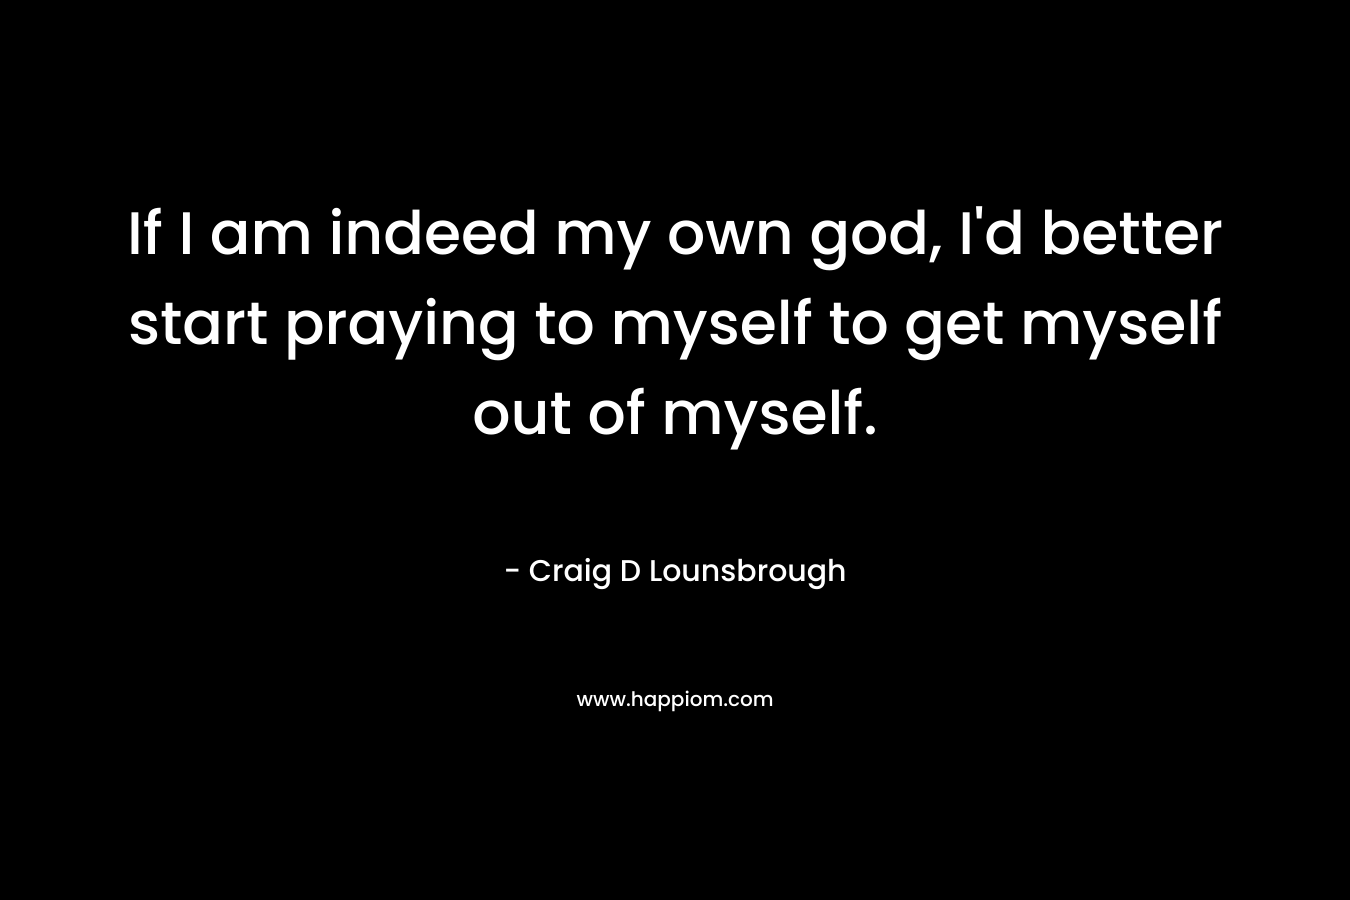 If I am indeed my own god, I'd better start praying to myself to get myself out of myself.